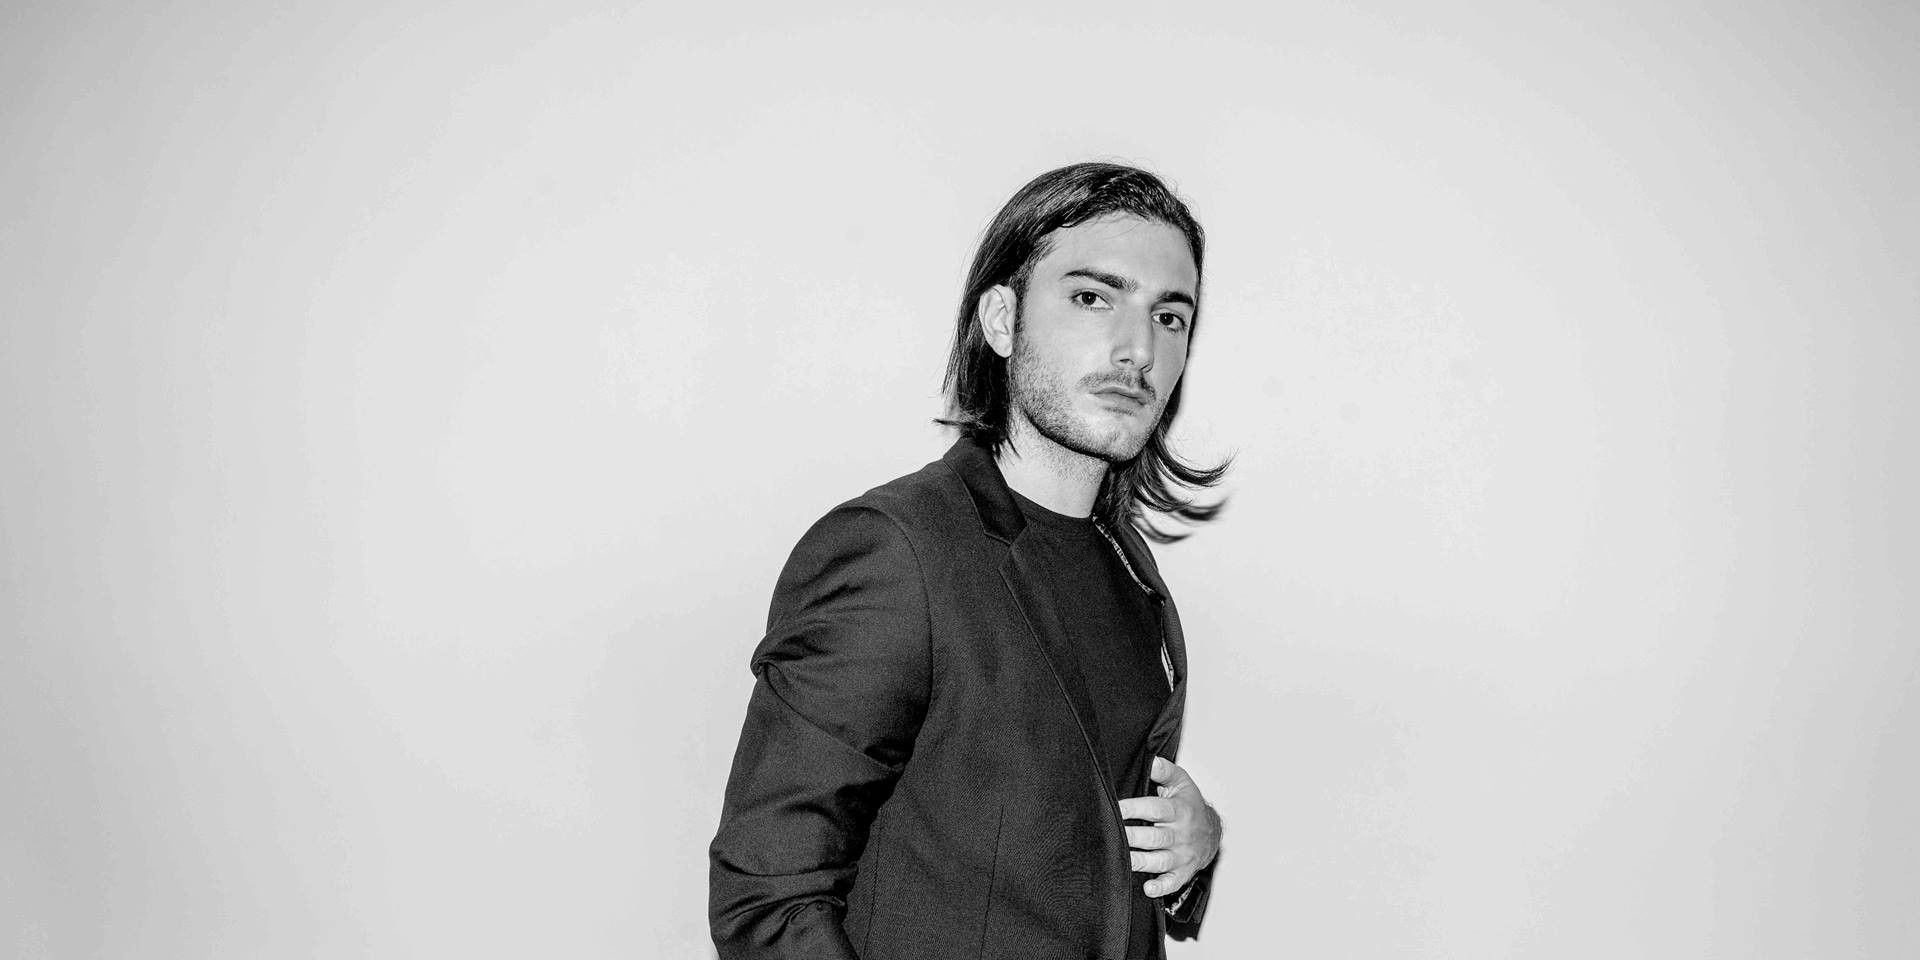 ALESSO is coming to Manila